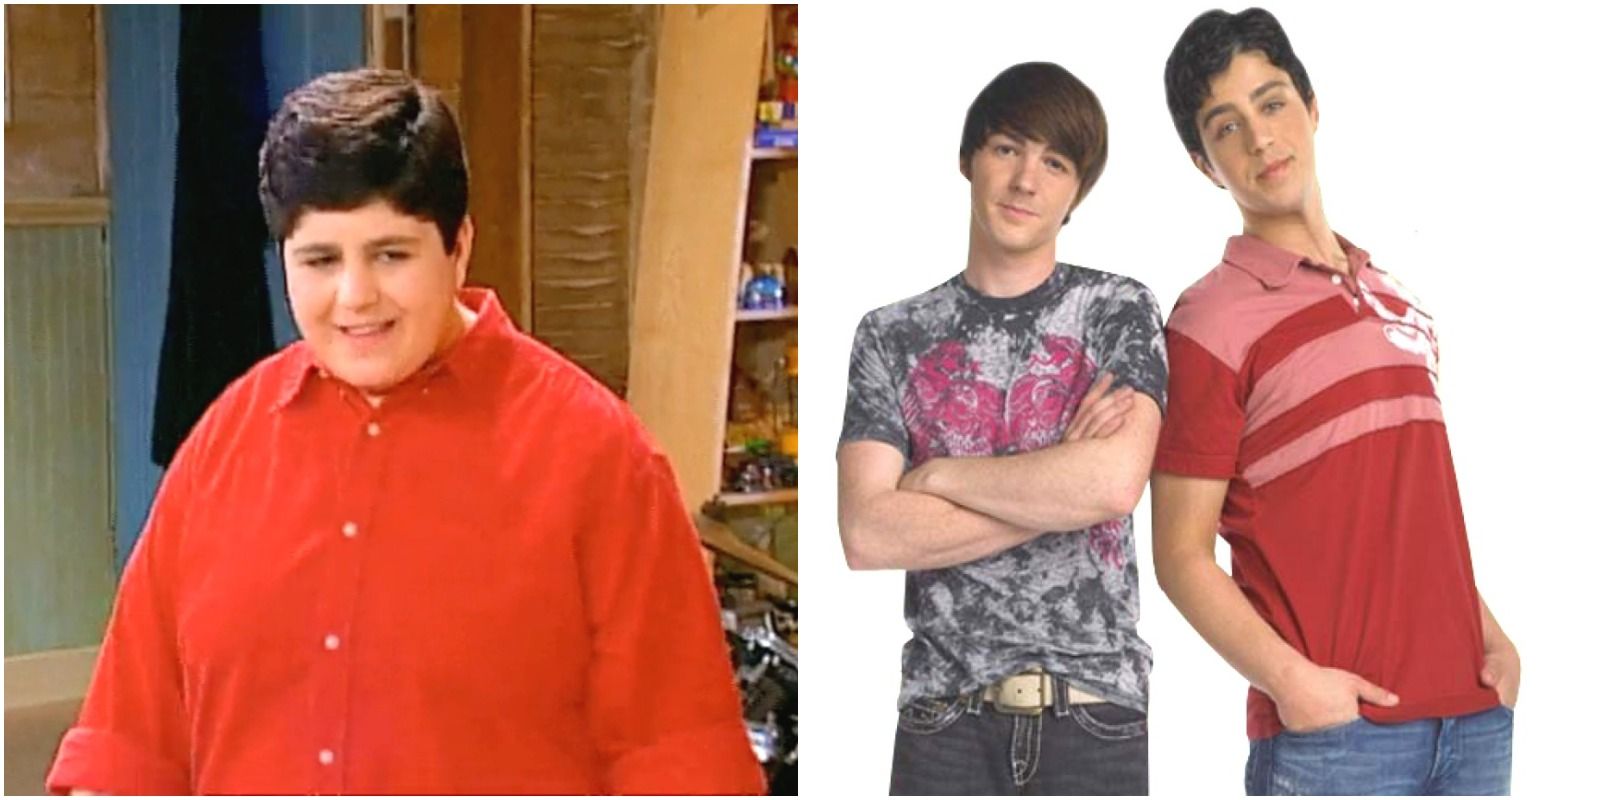 Big Josh from season 1 and muscular Josh from the later seasons